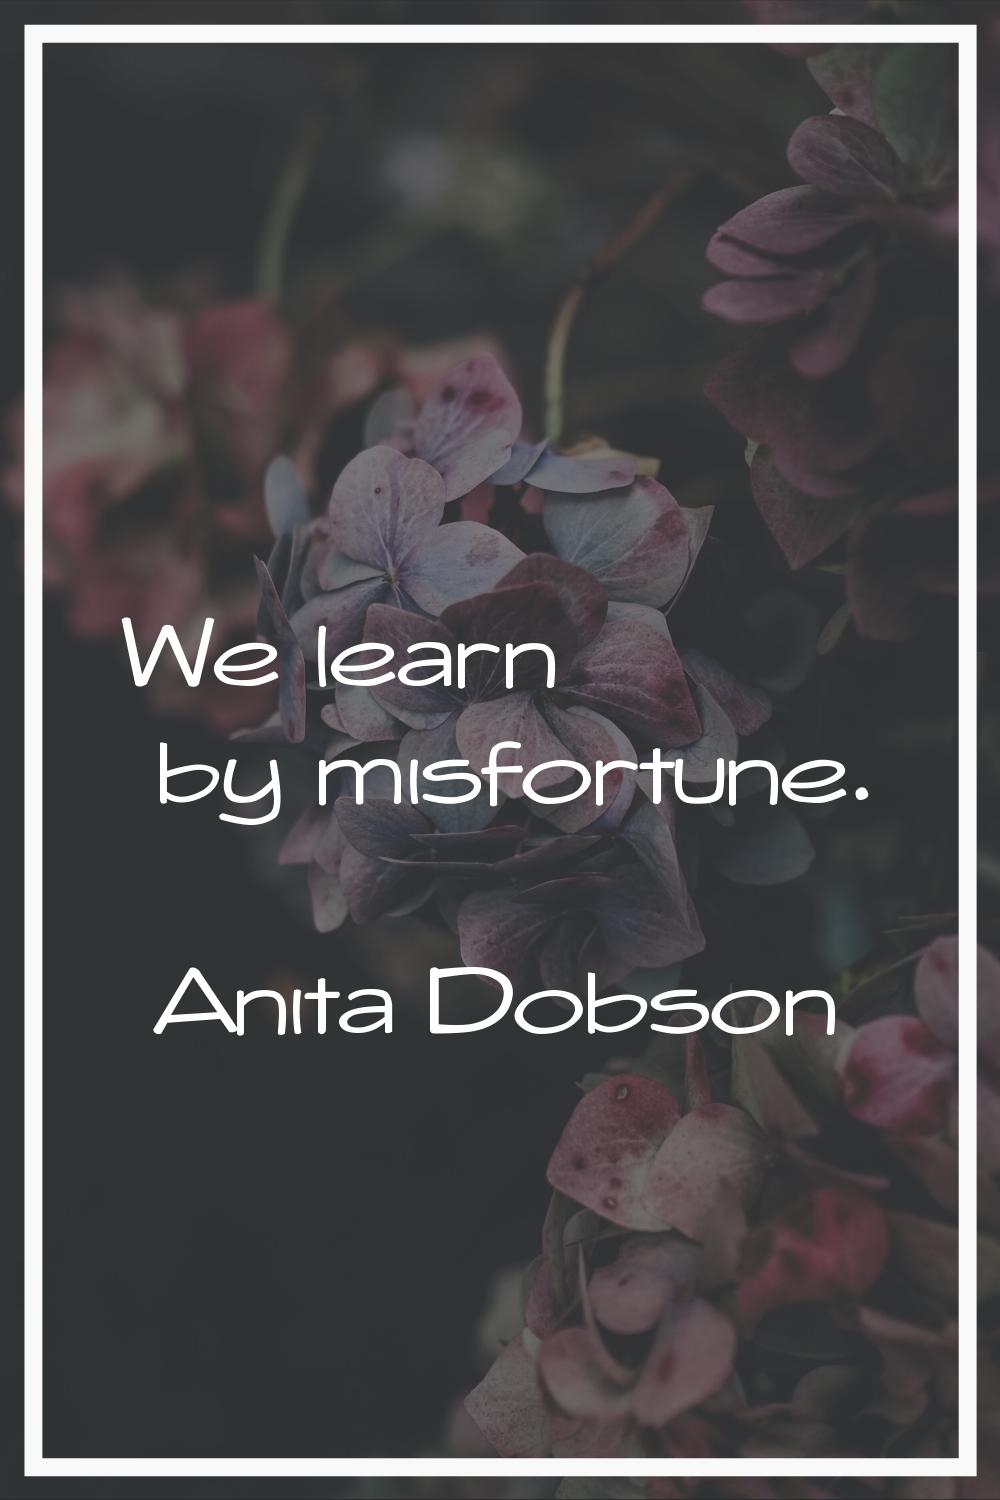 We learn by misfortune.